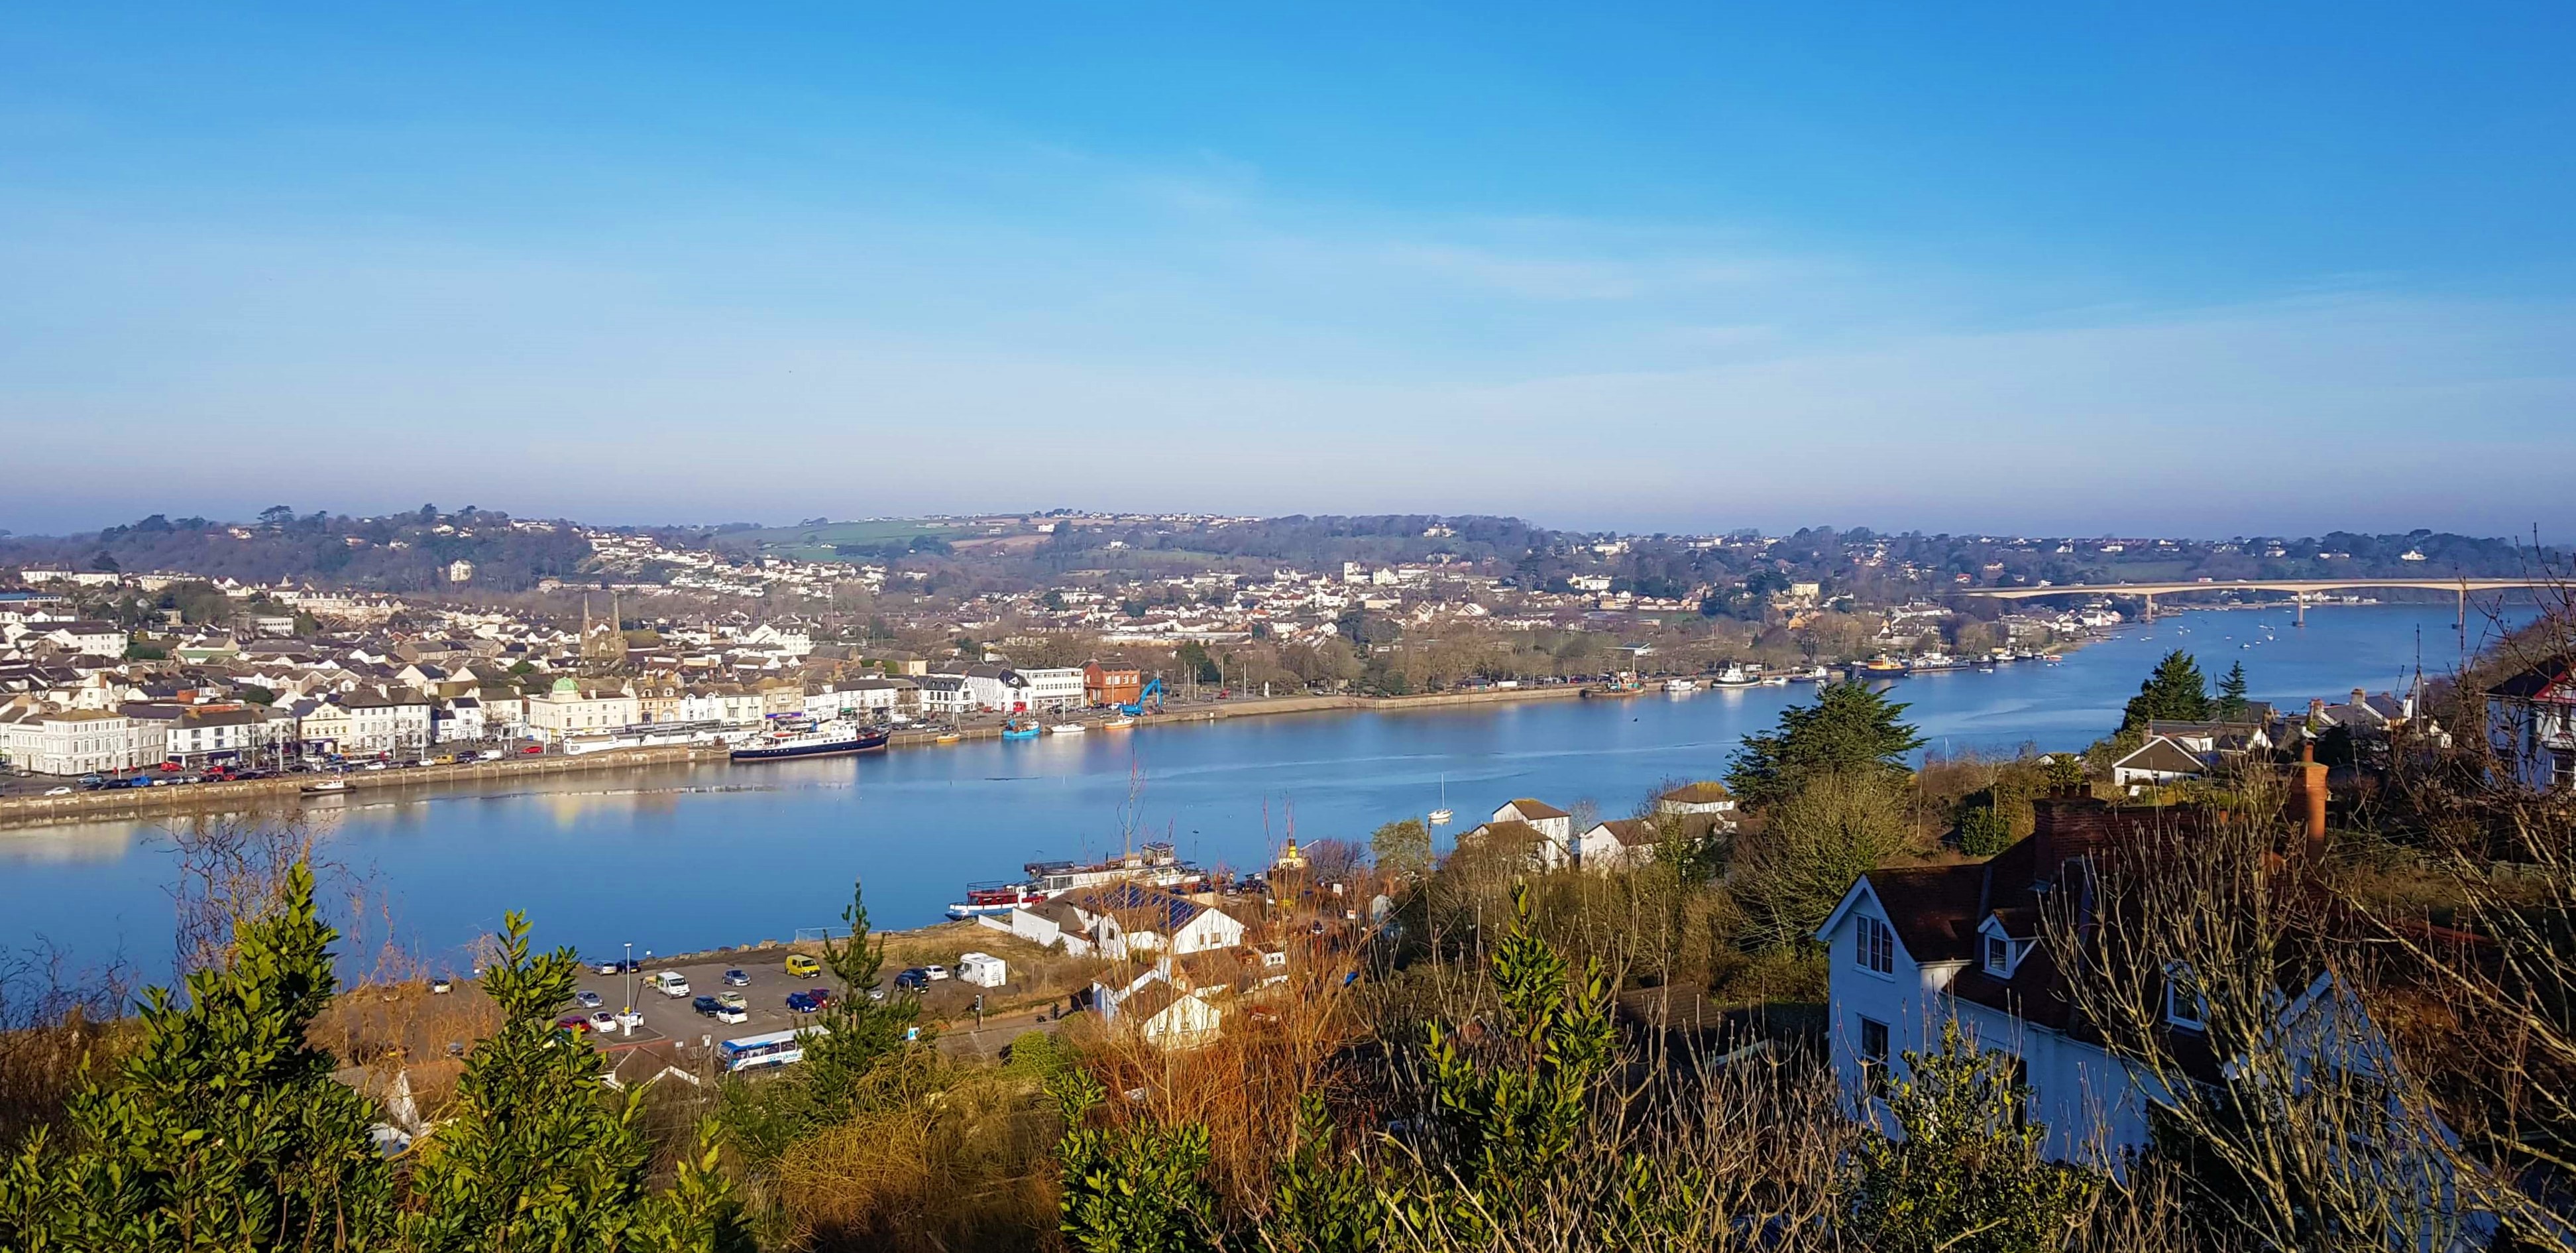 View over Bideford properties to the River Taw